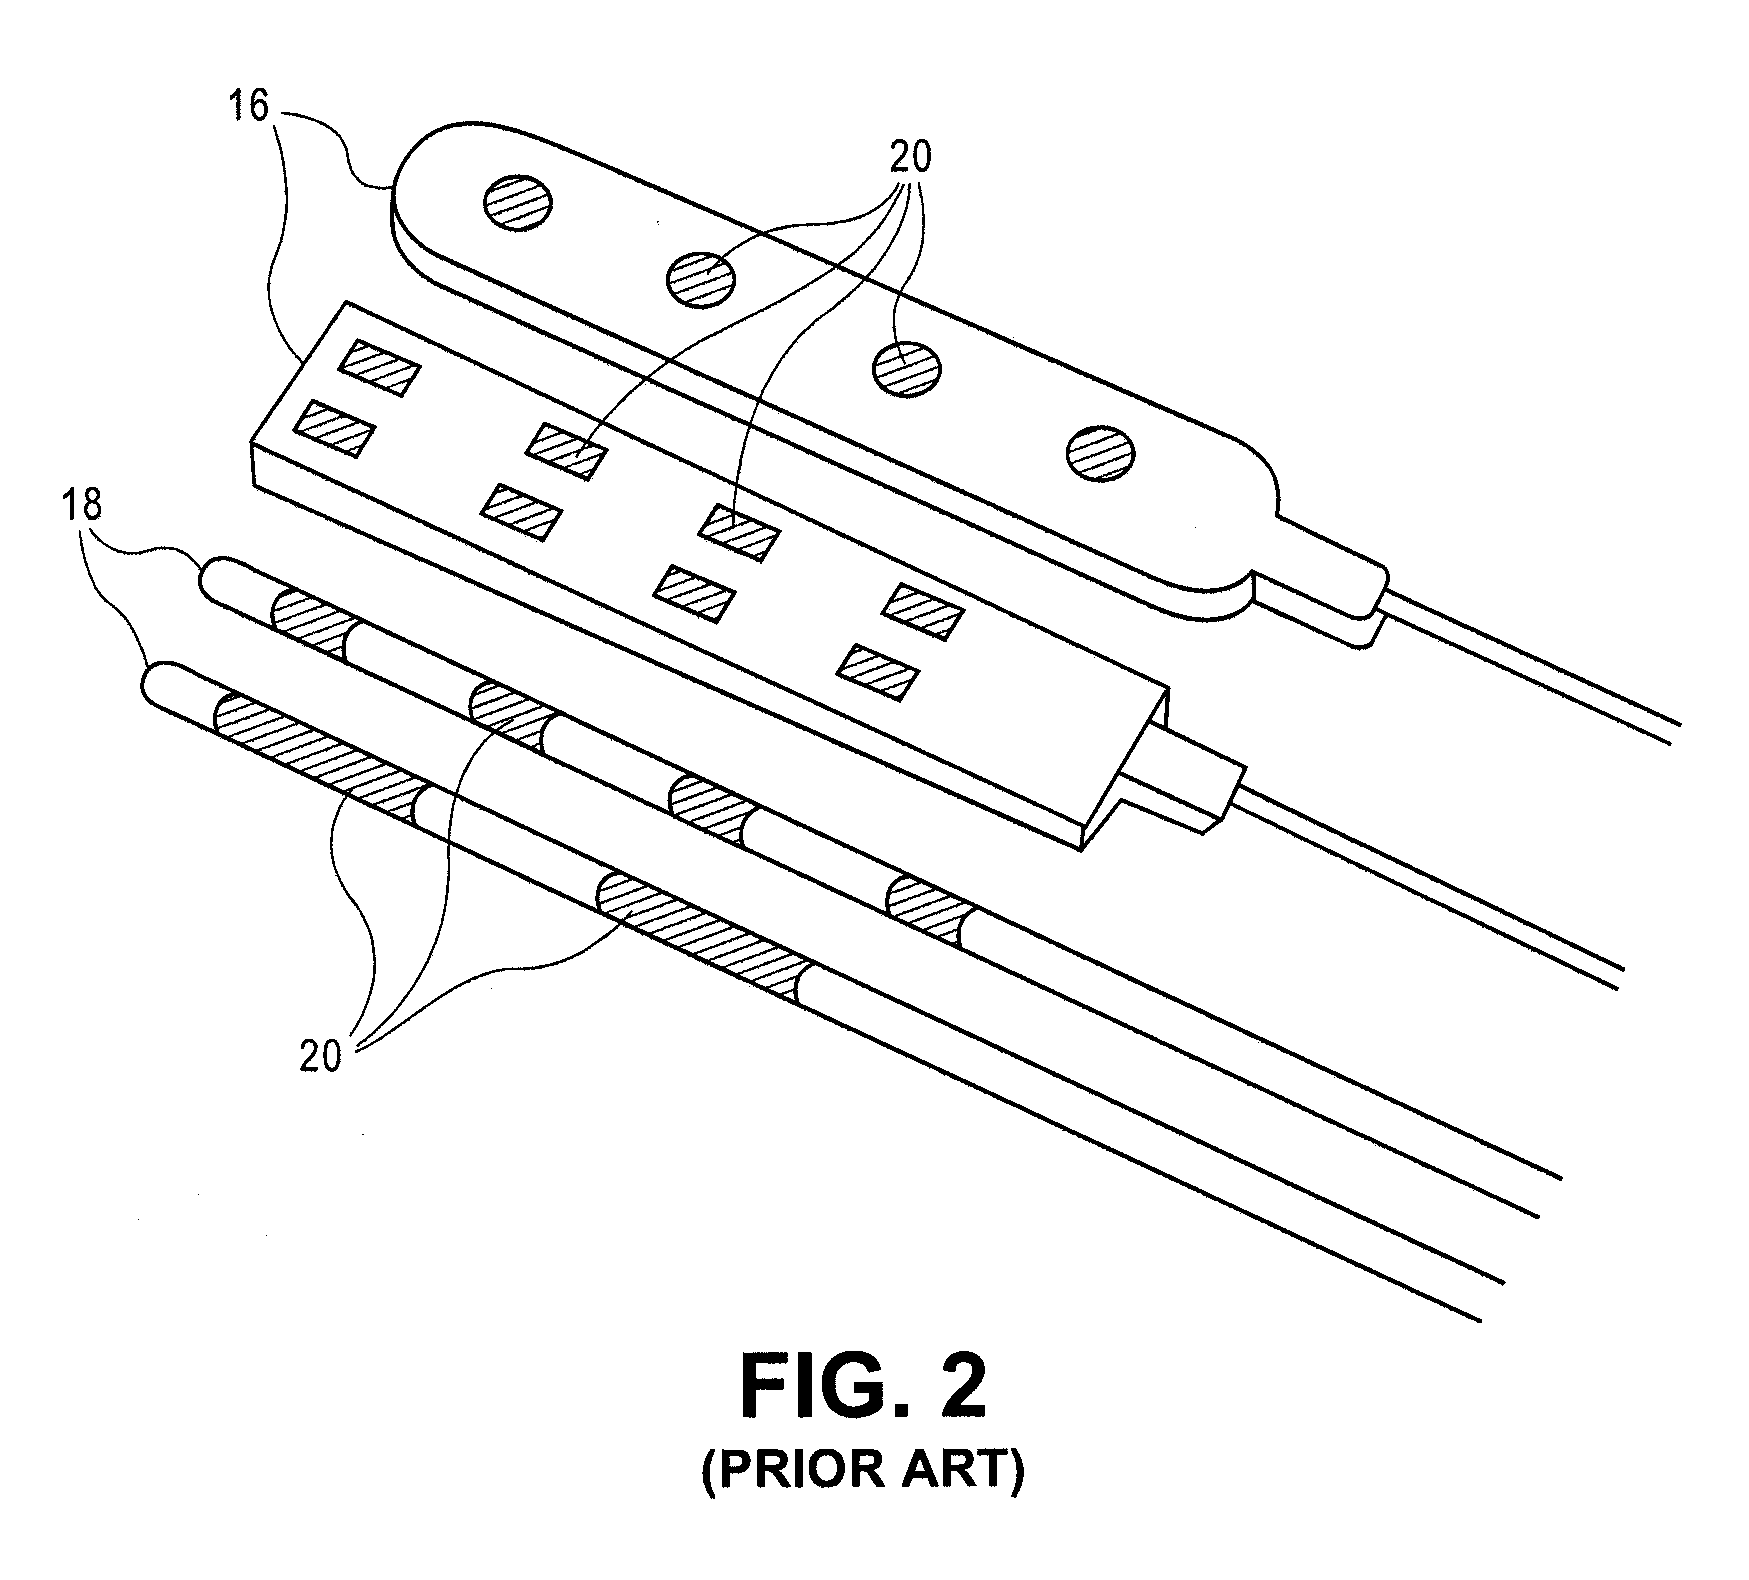 Implantable flexible circuit leads and methods of use